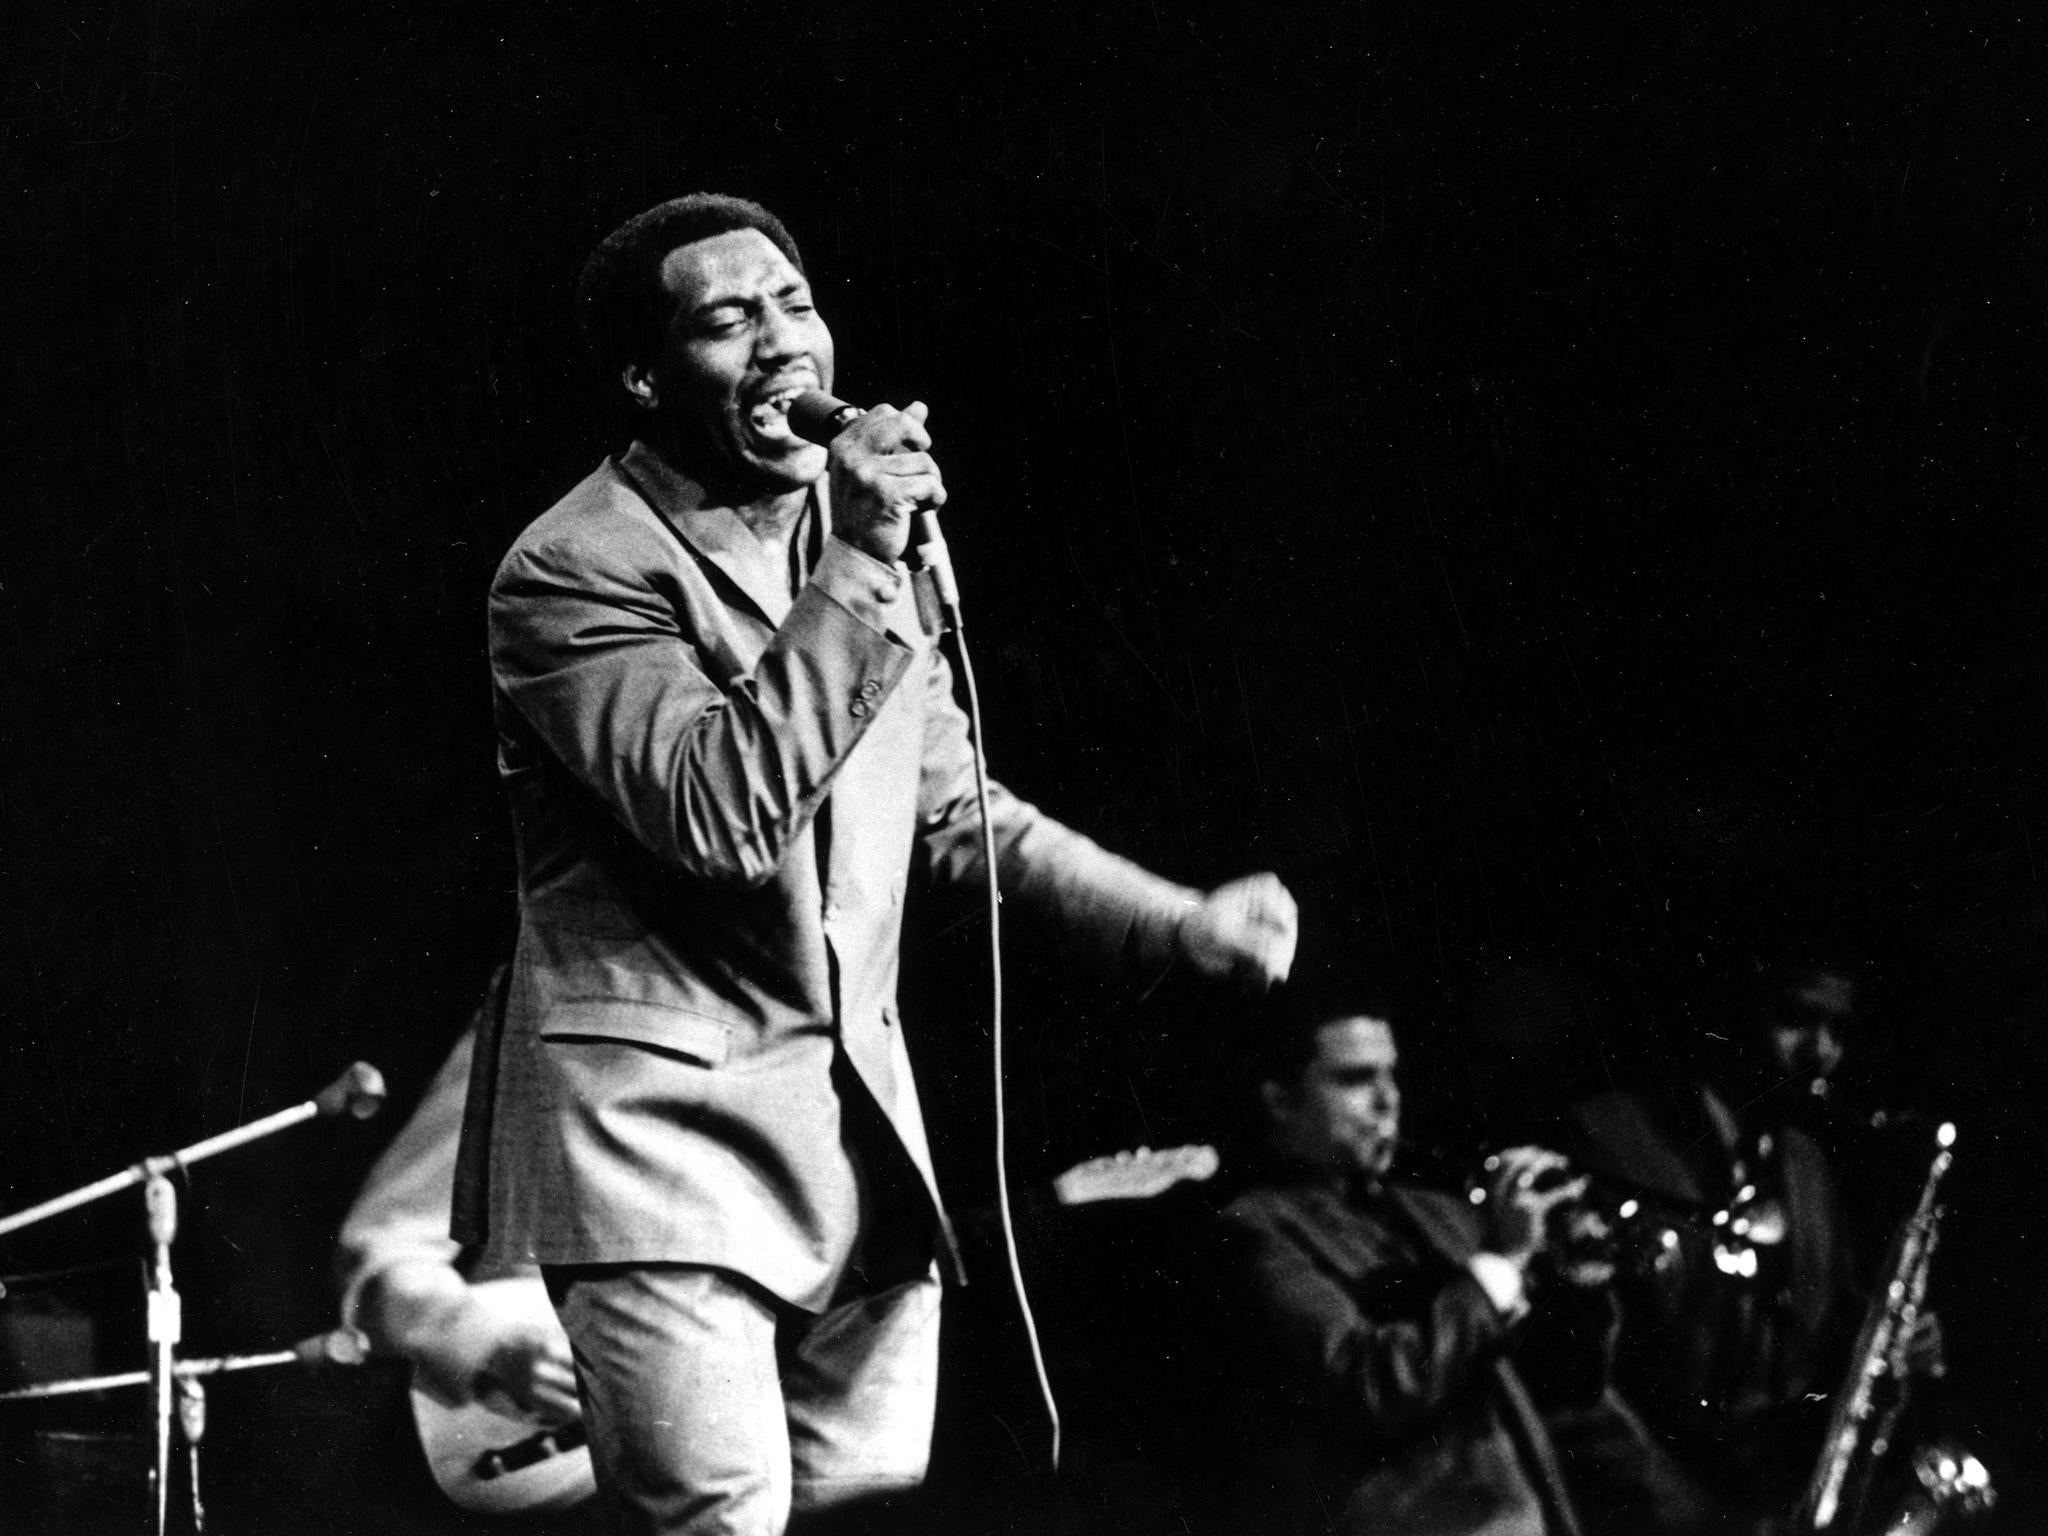 Did Otis Redding need those brackets on his biggest hit? Who knows...